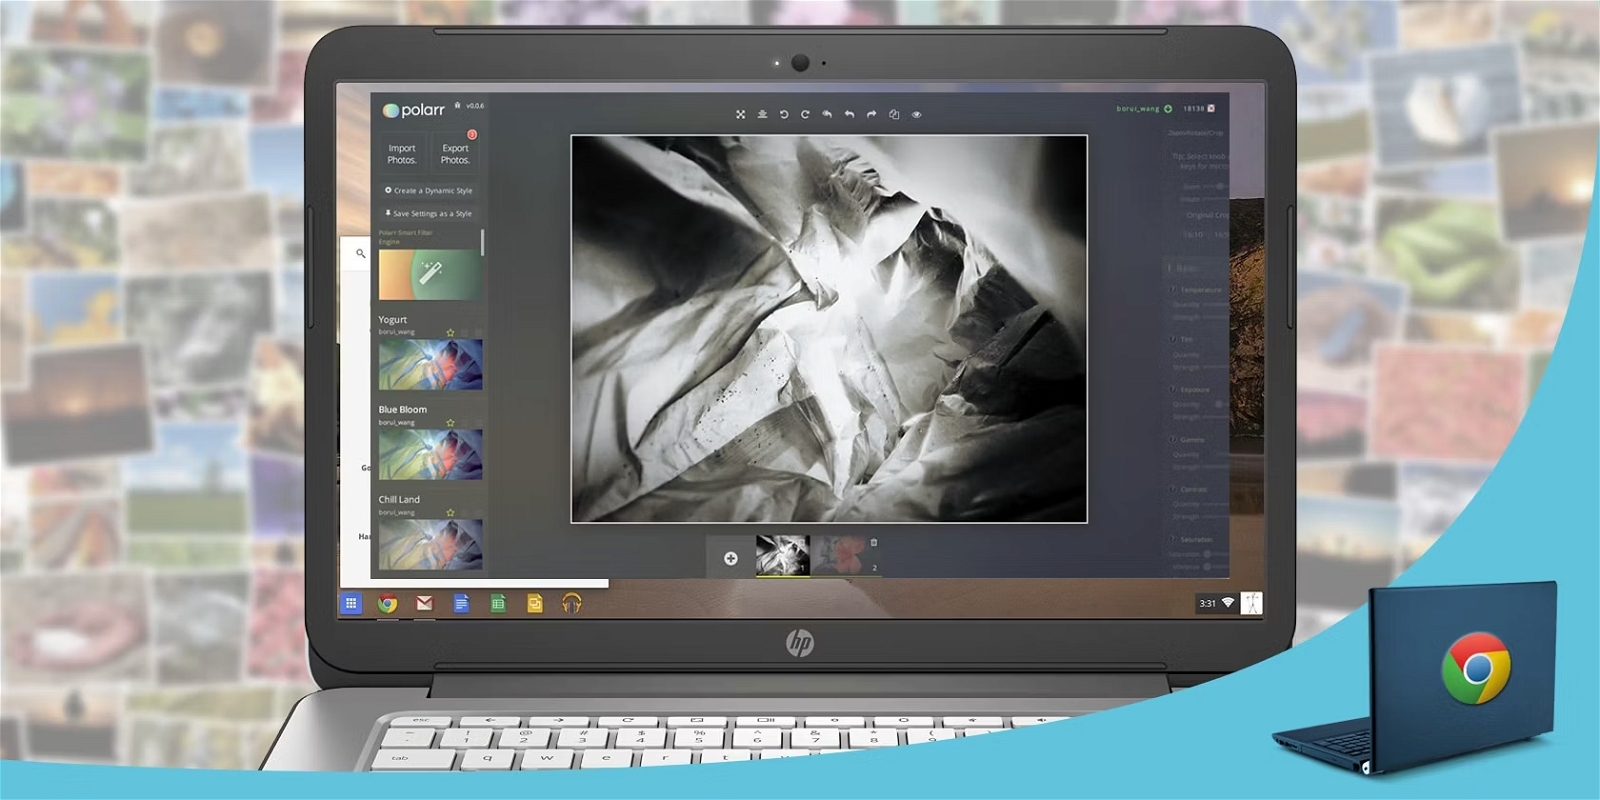 photoshop for chromebook free download